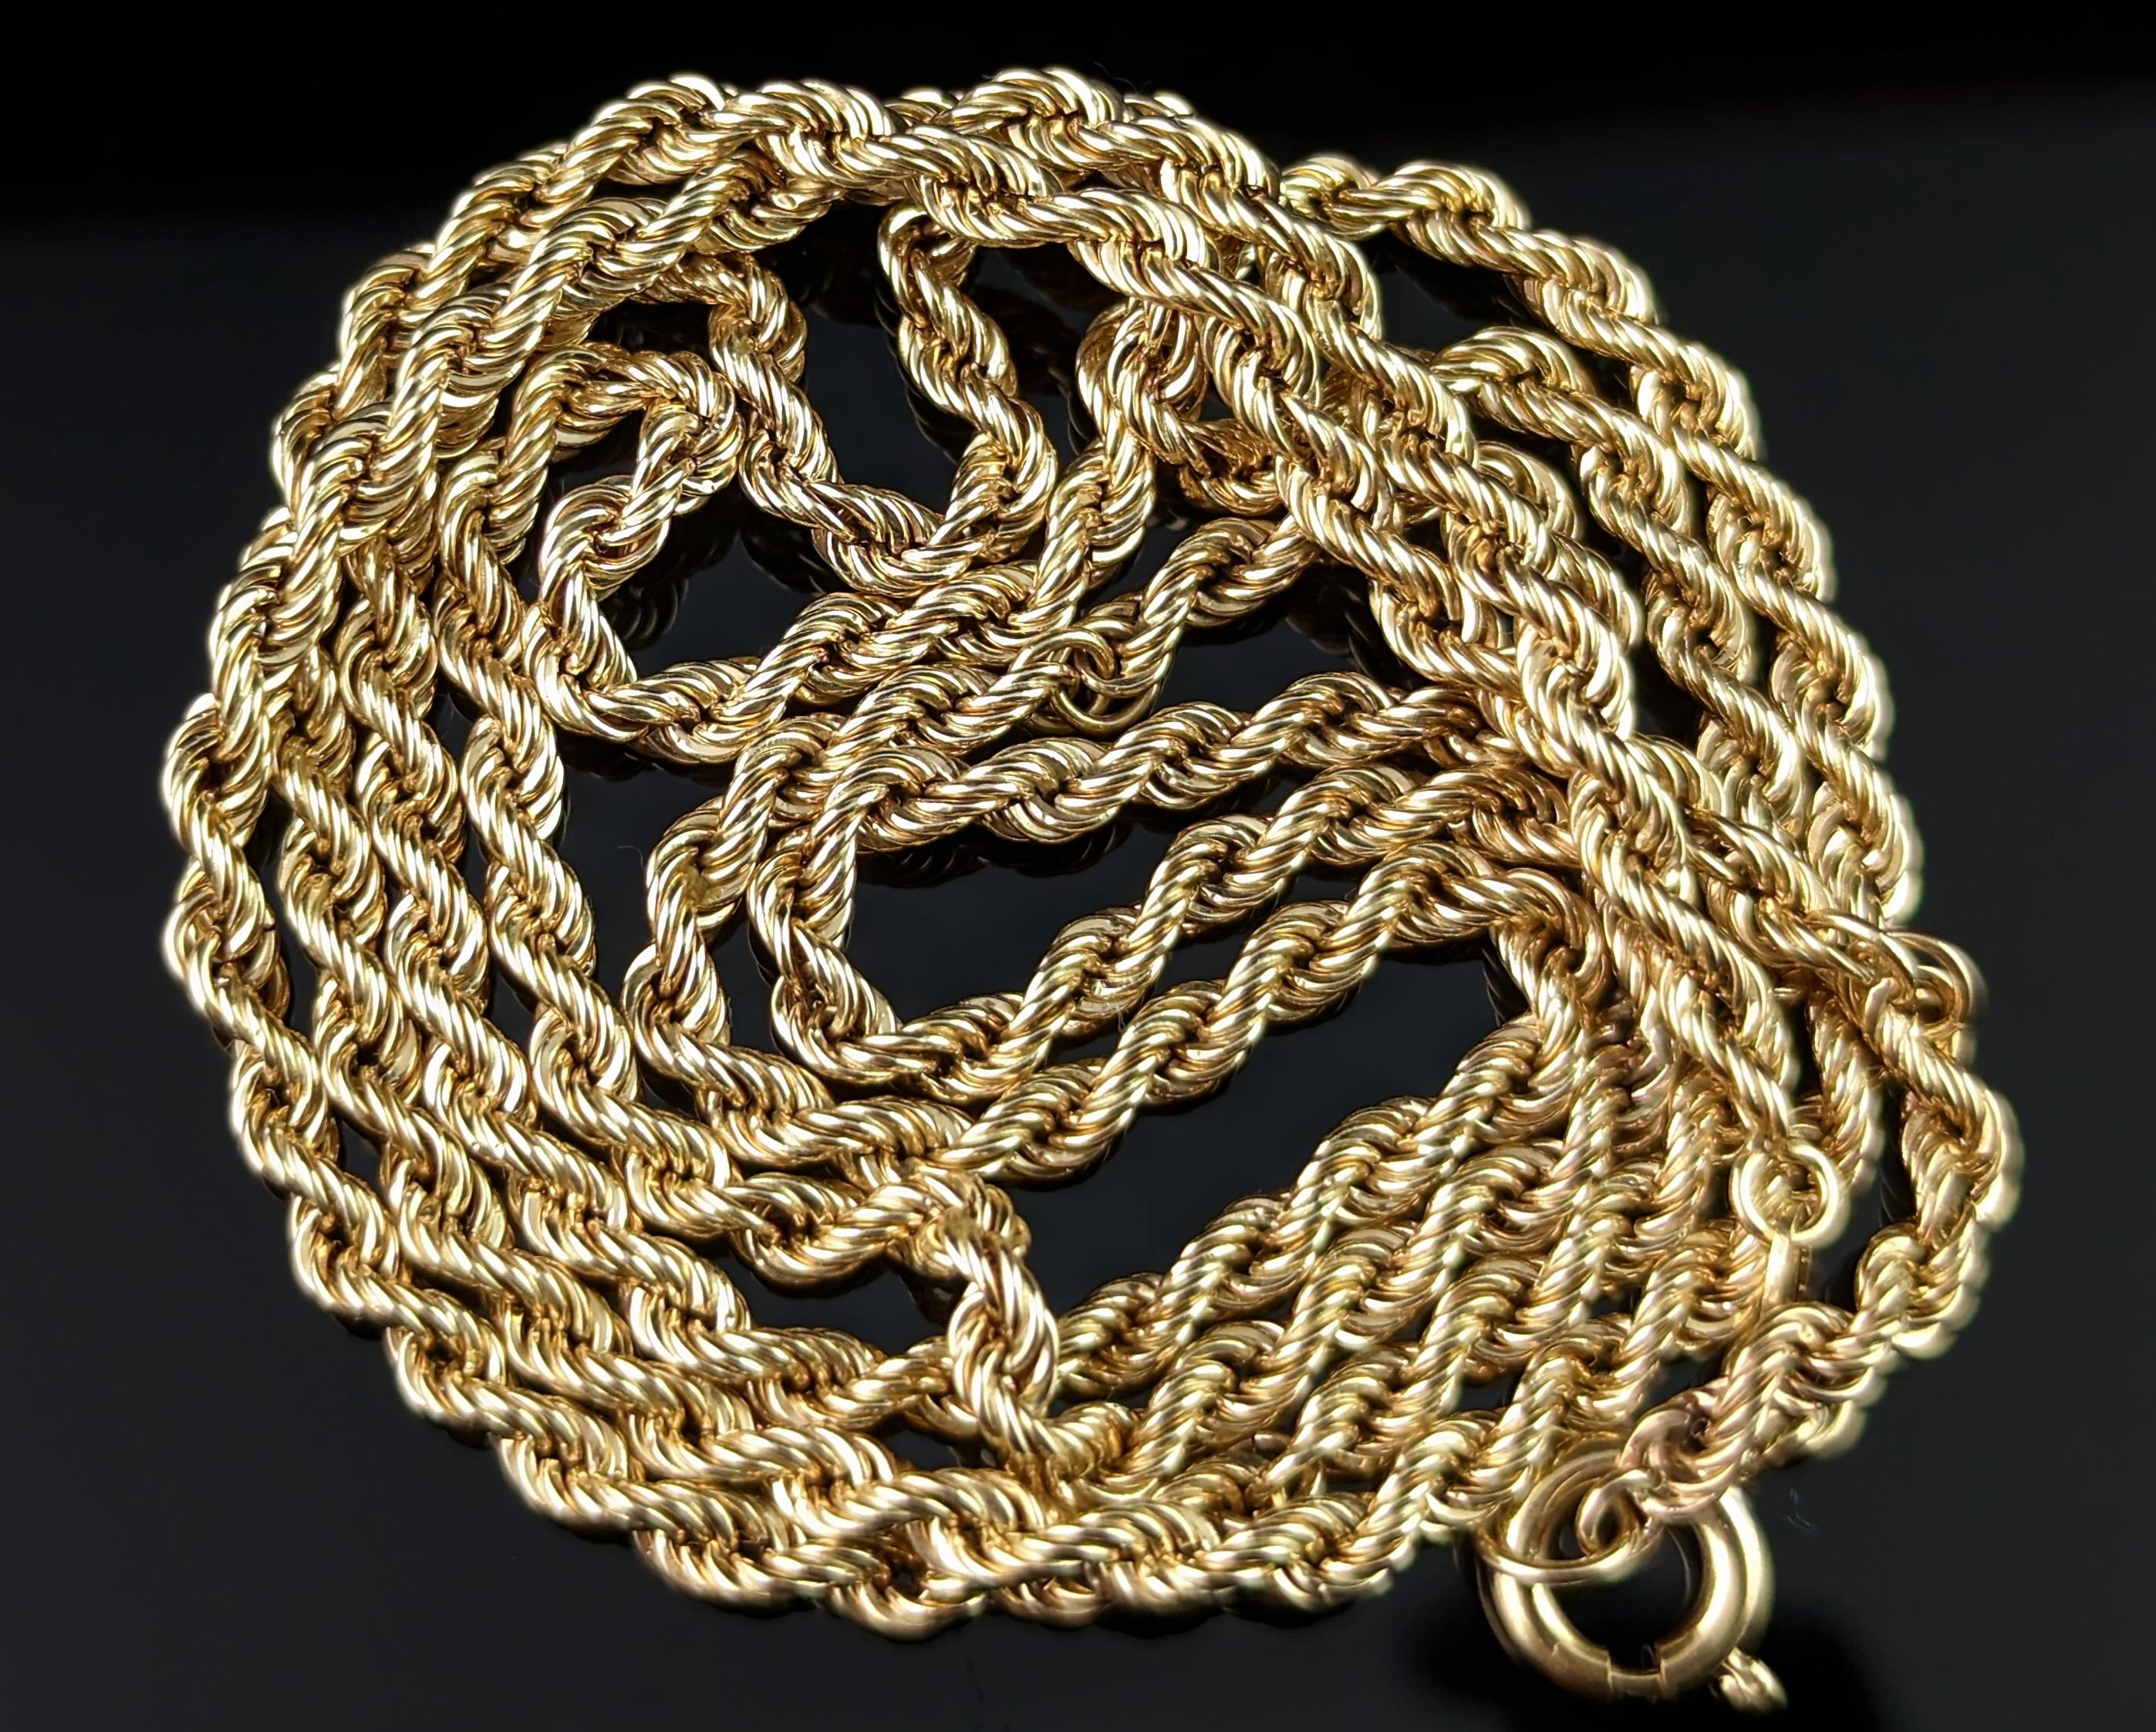 Vintage 9k Gold Rope Twist Chain Necklace, Long  2